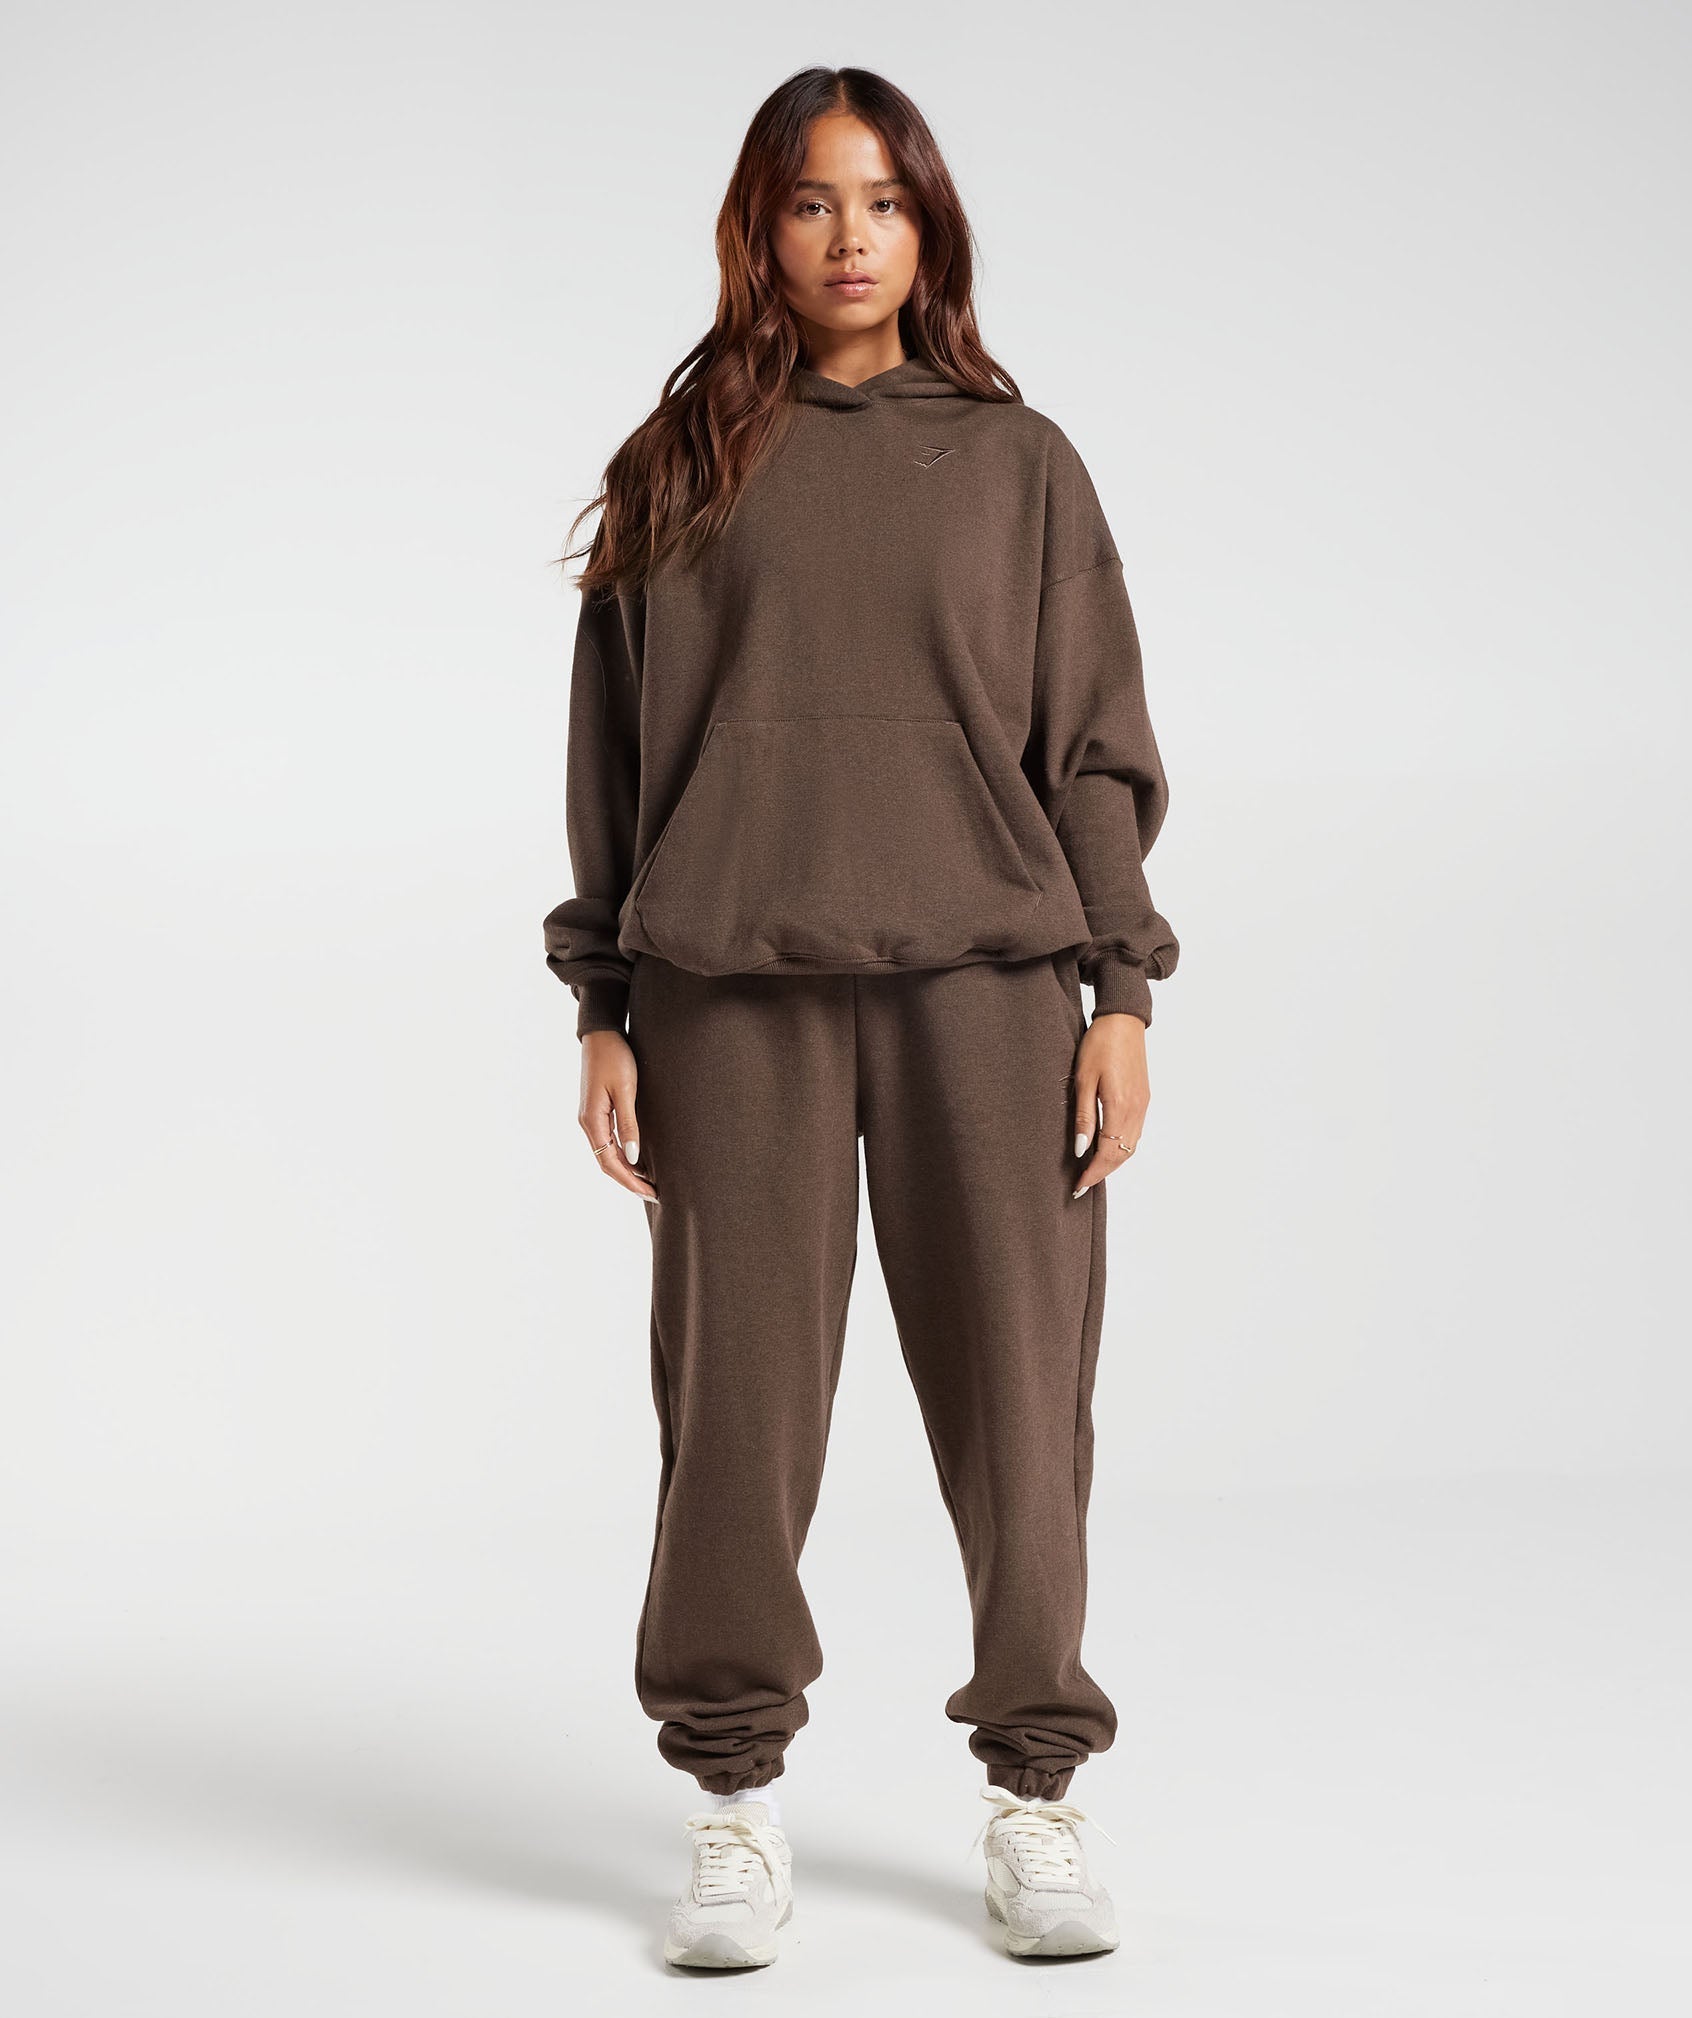 Rest Day Sweats Joggers in Cozy Brown Marl - view 4